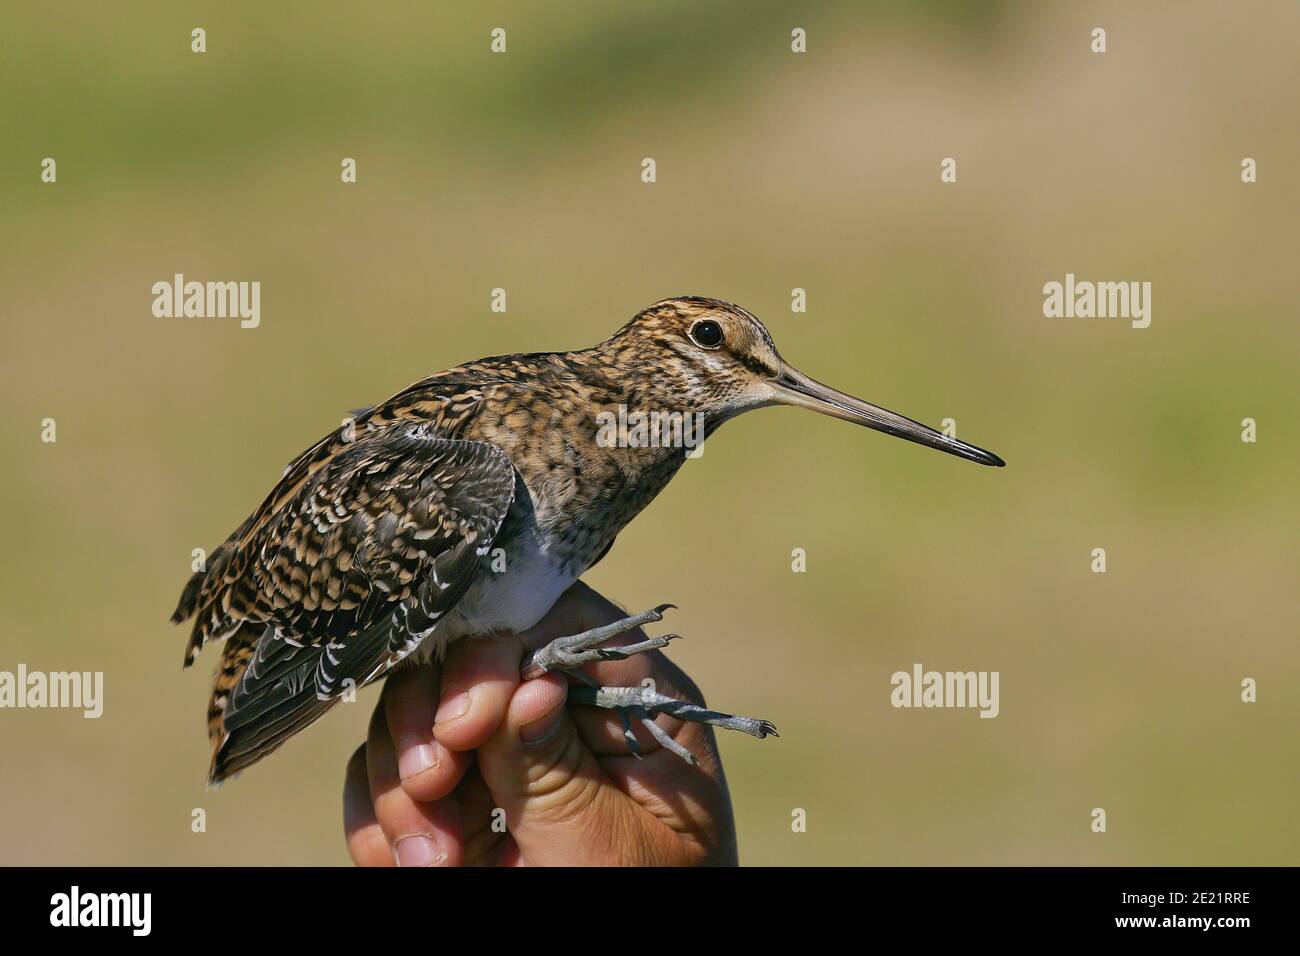 Pin-tailed Snipe (Gallinago stenura) held by ornithologist and bird ringer for scientific bird ringing, Mongolia Stock Photo